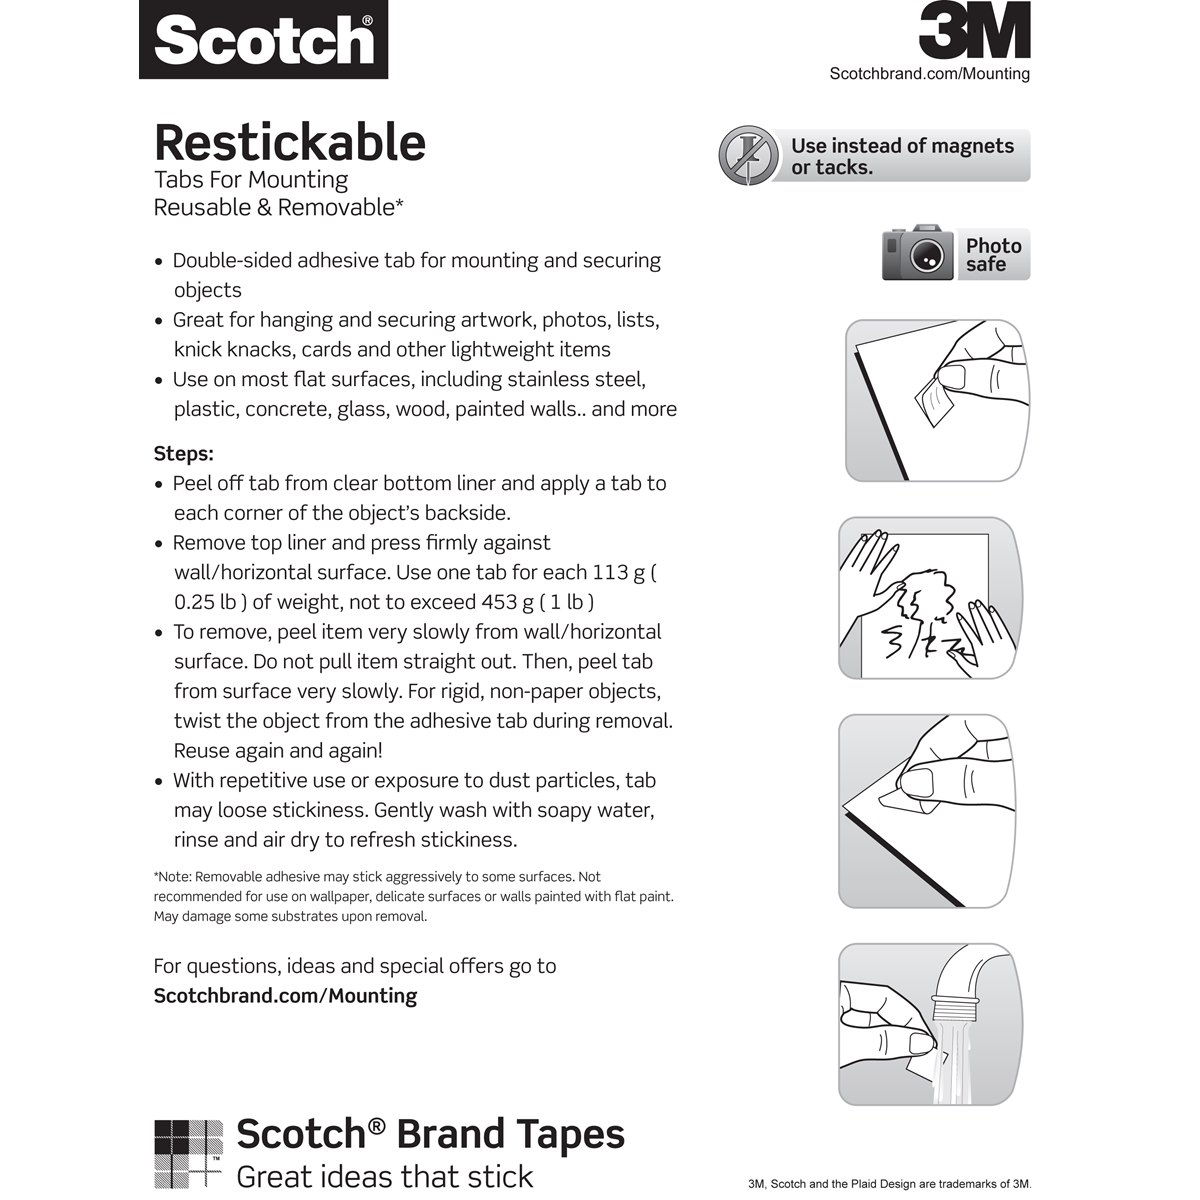 Scotch Restickable Tabs for Mounting Instructions